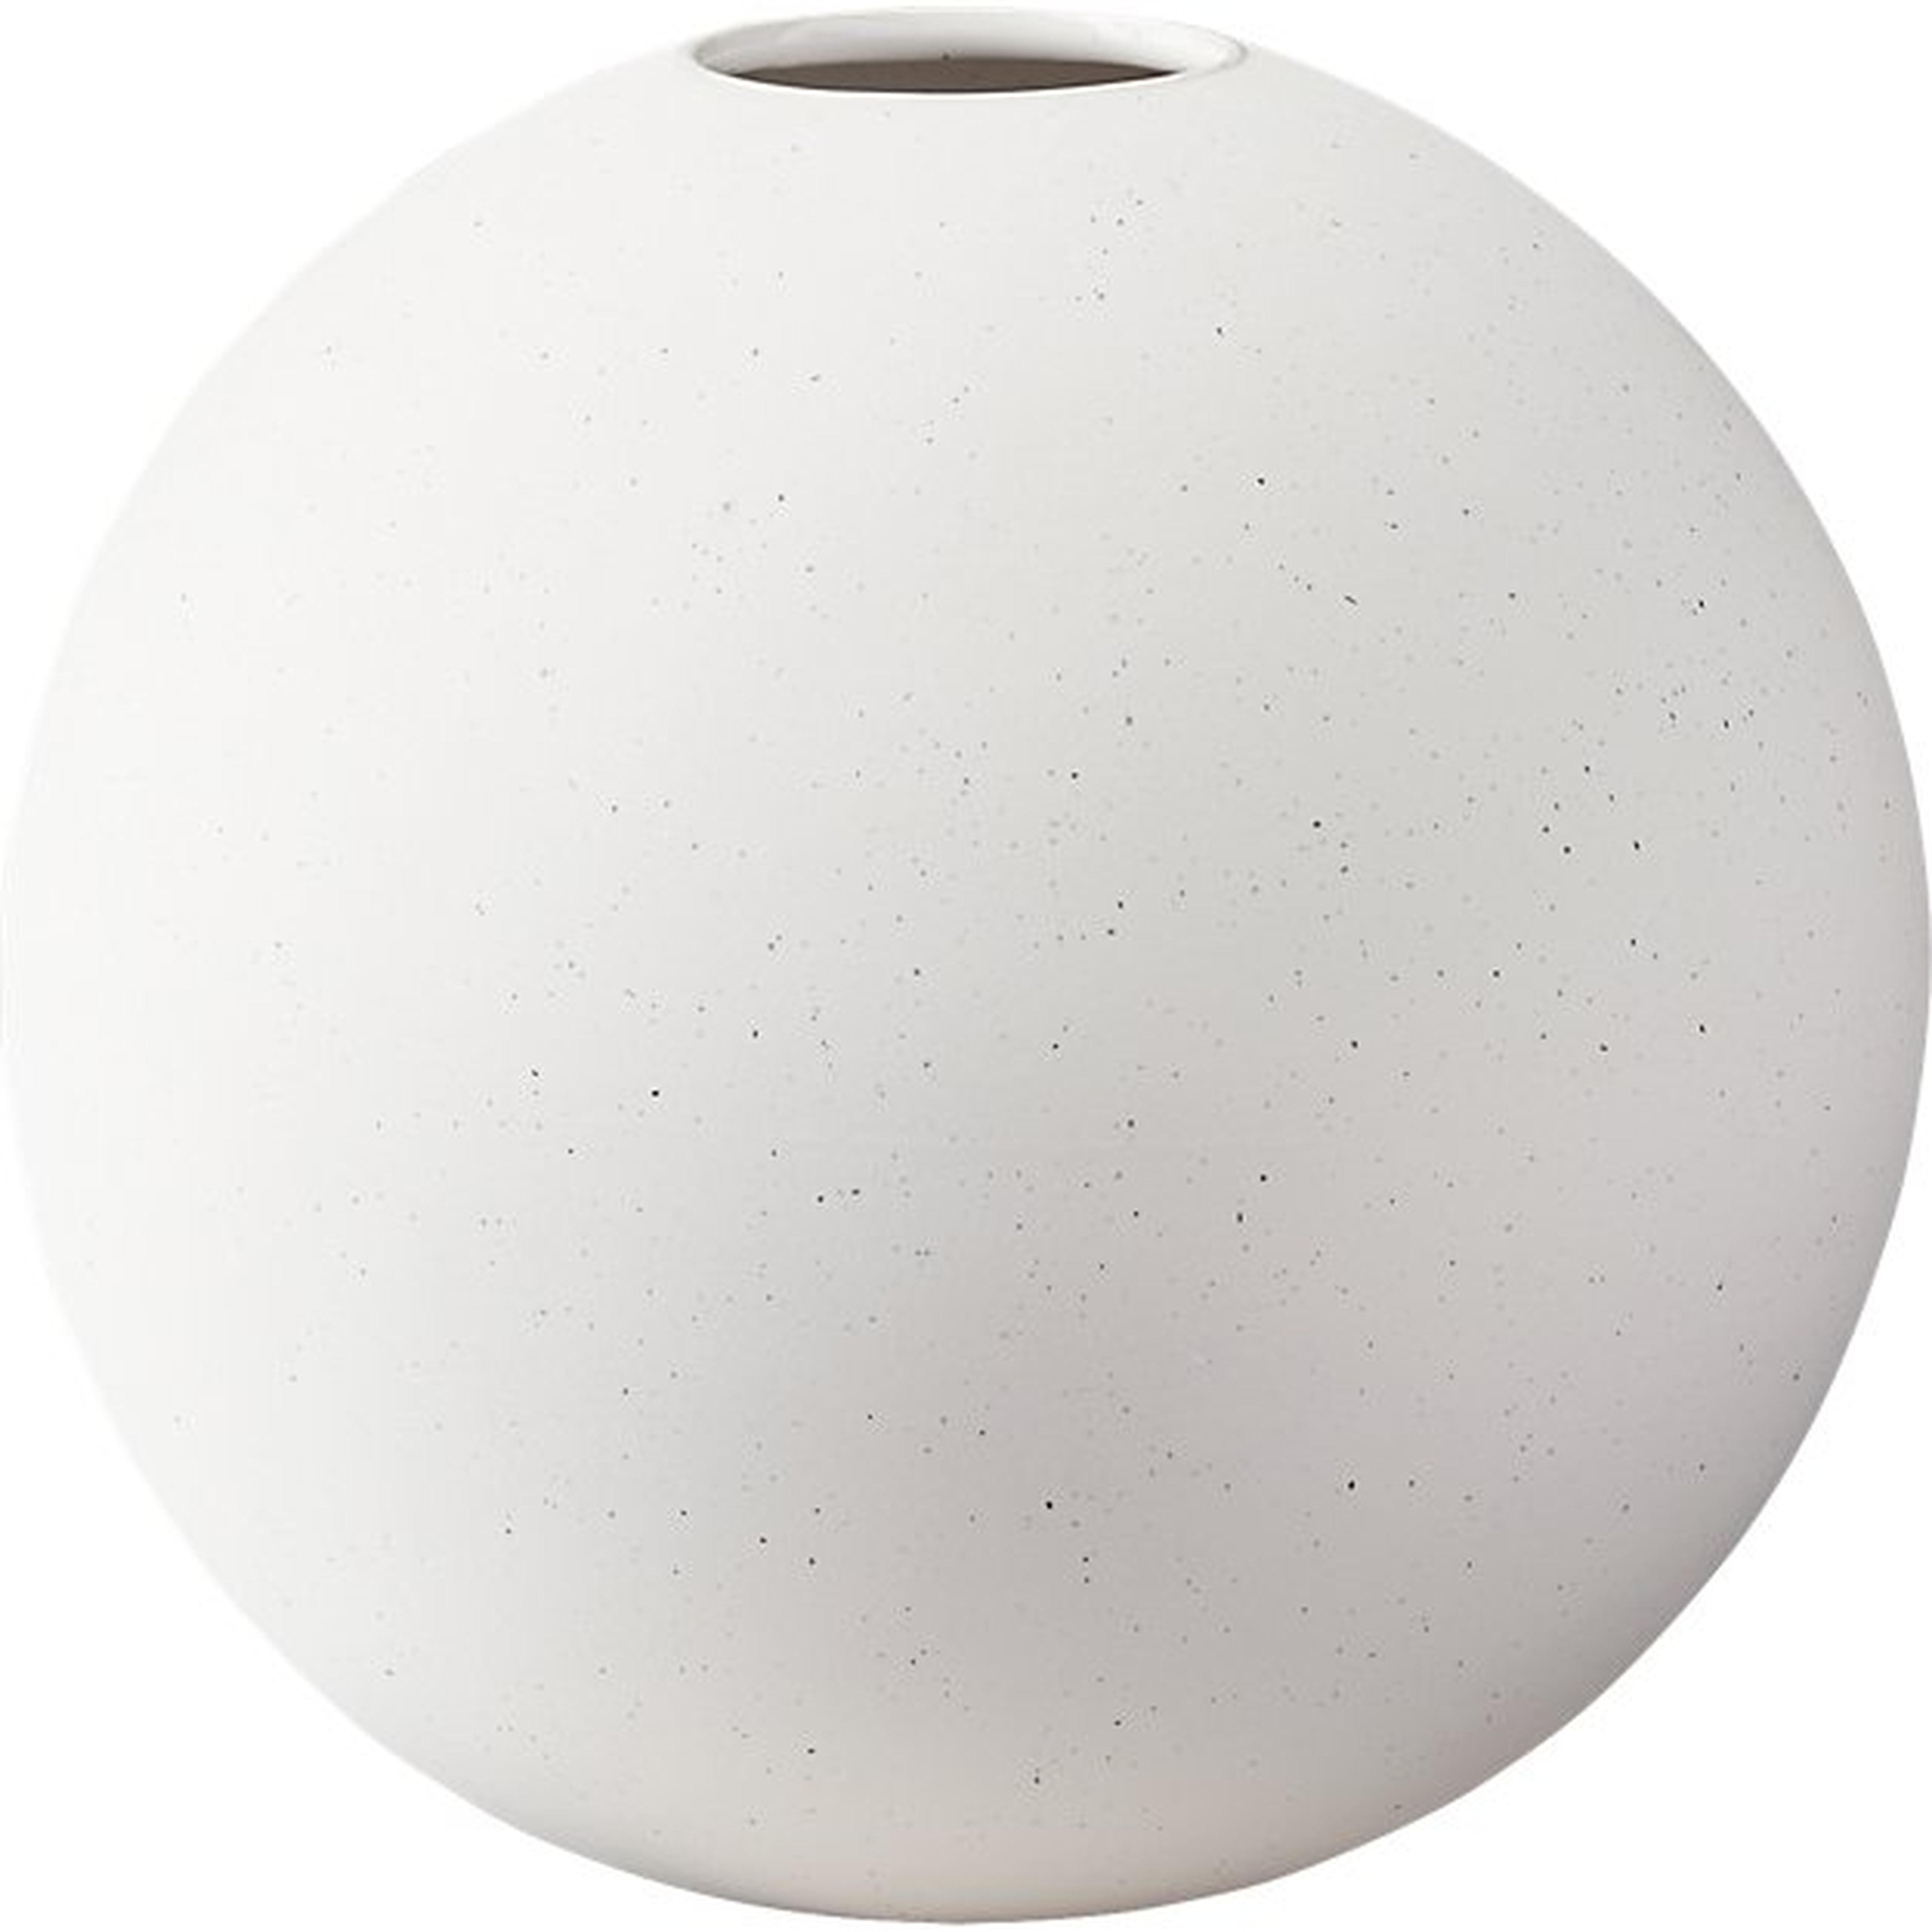 LYLE ROUND VASE - Crate and Barrel